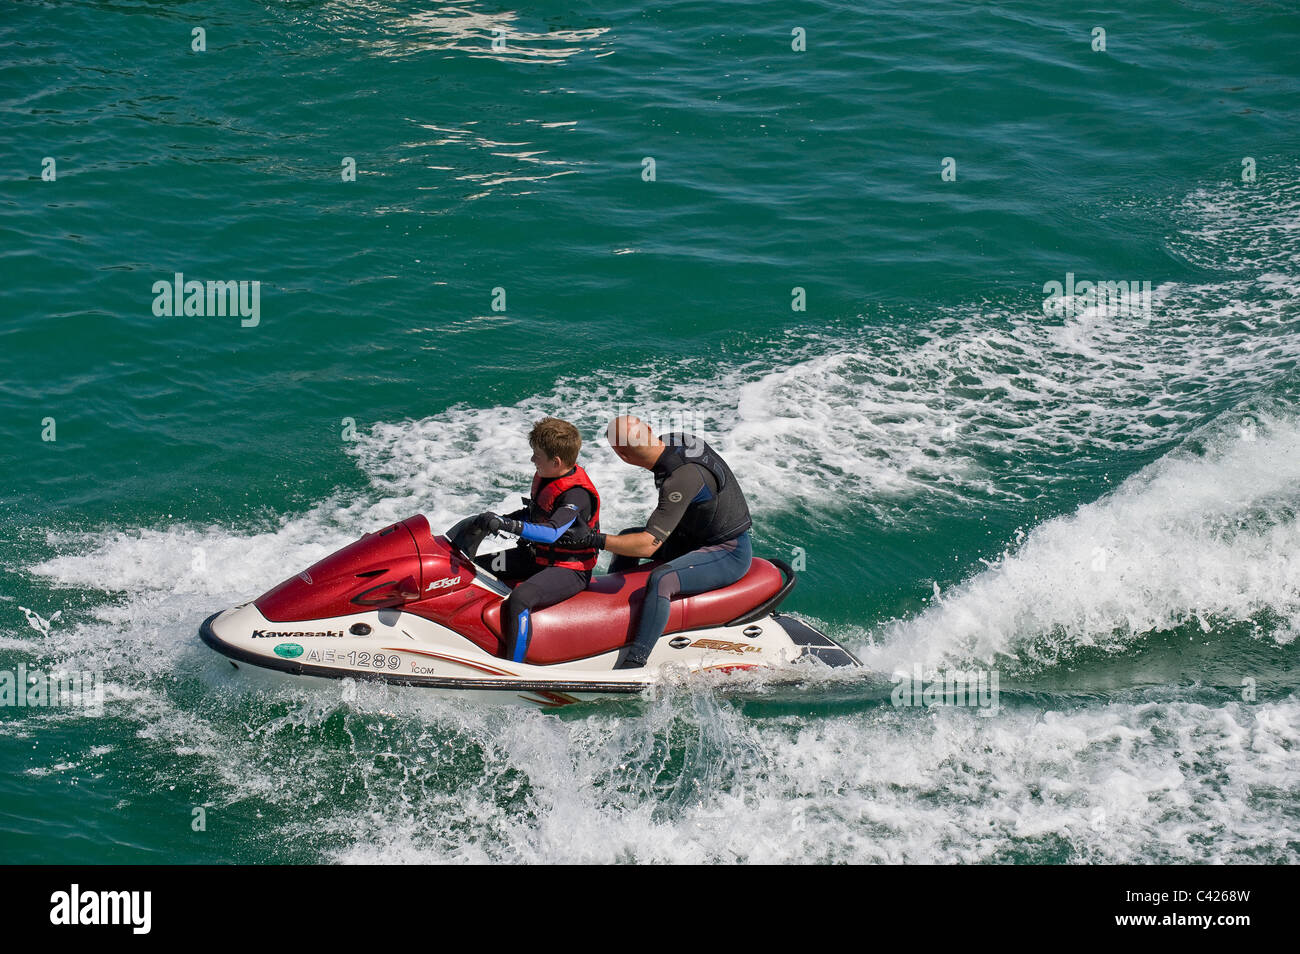 Two people on a jet ski Stock Photo